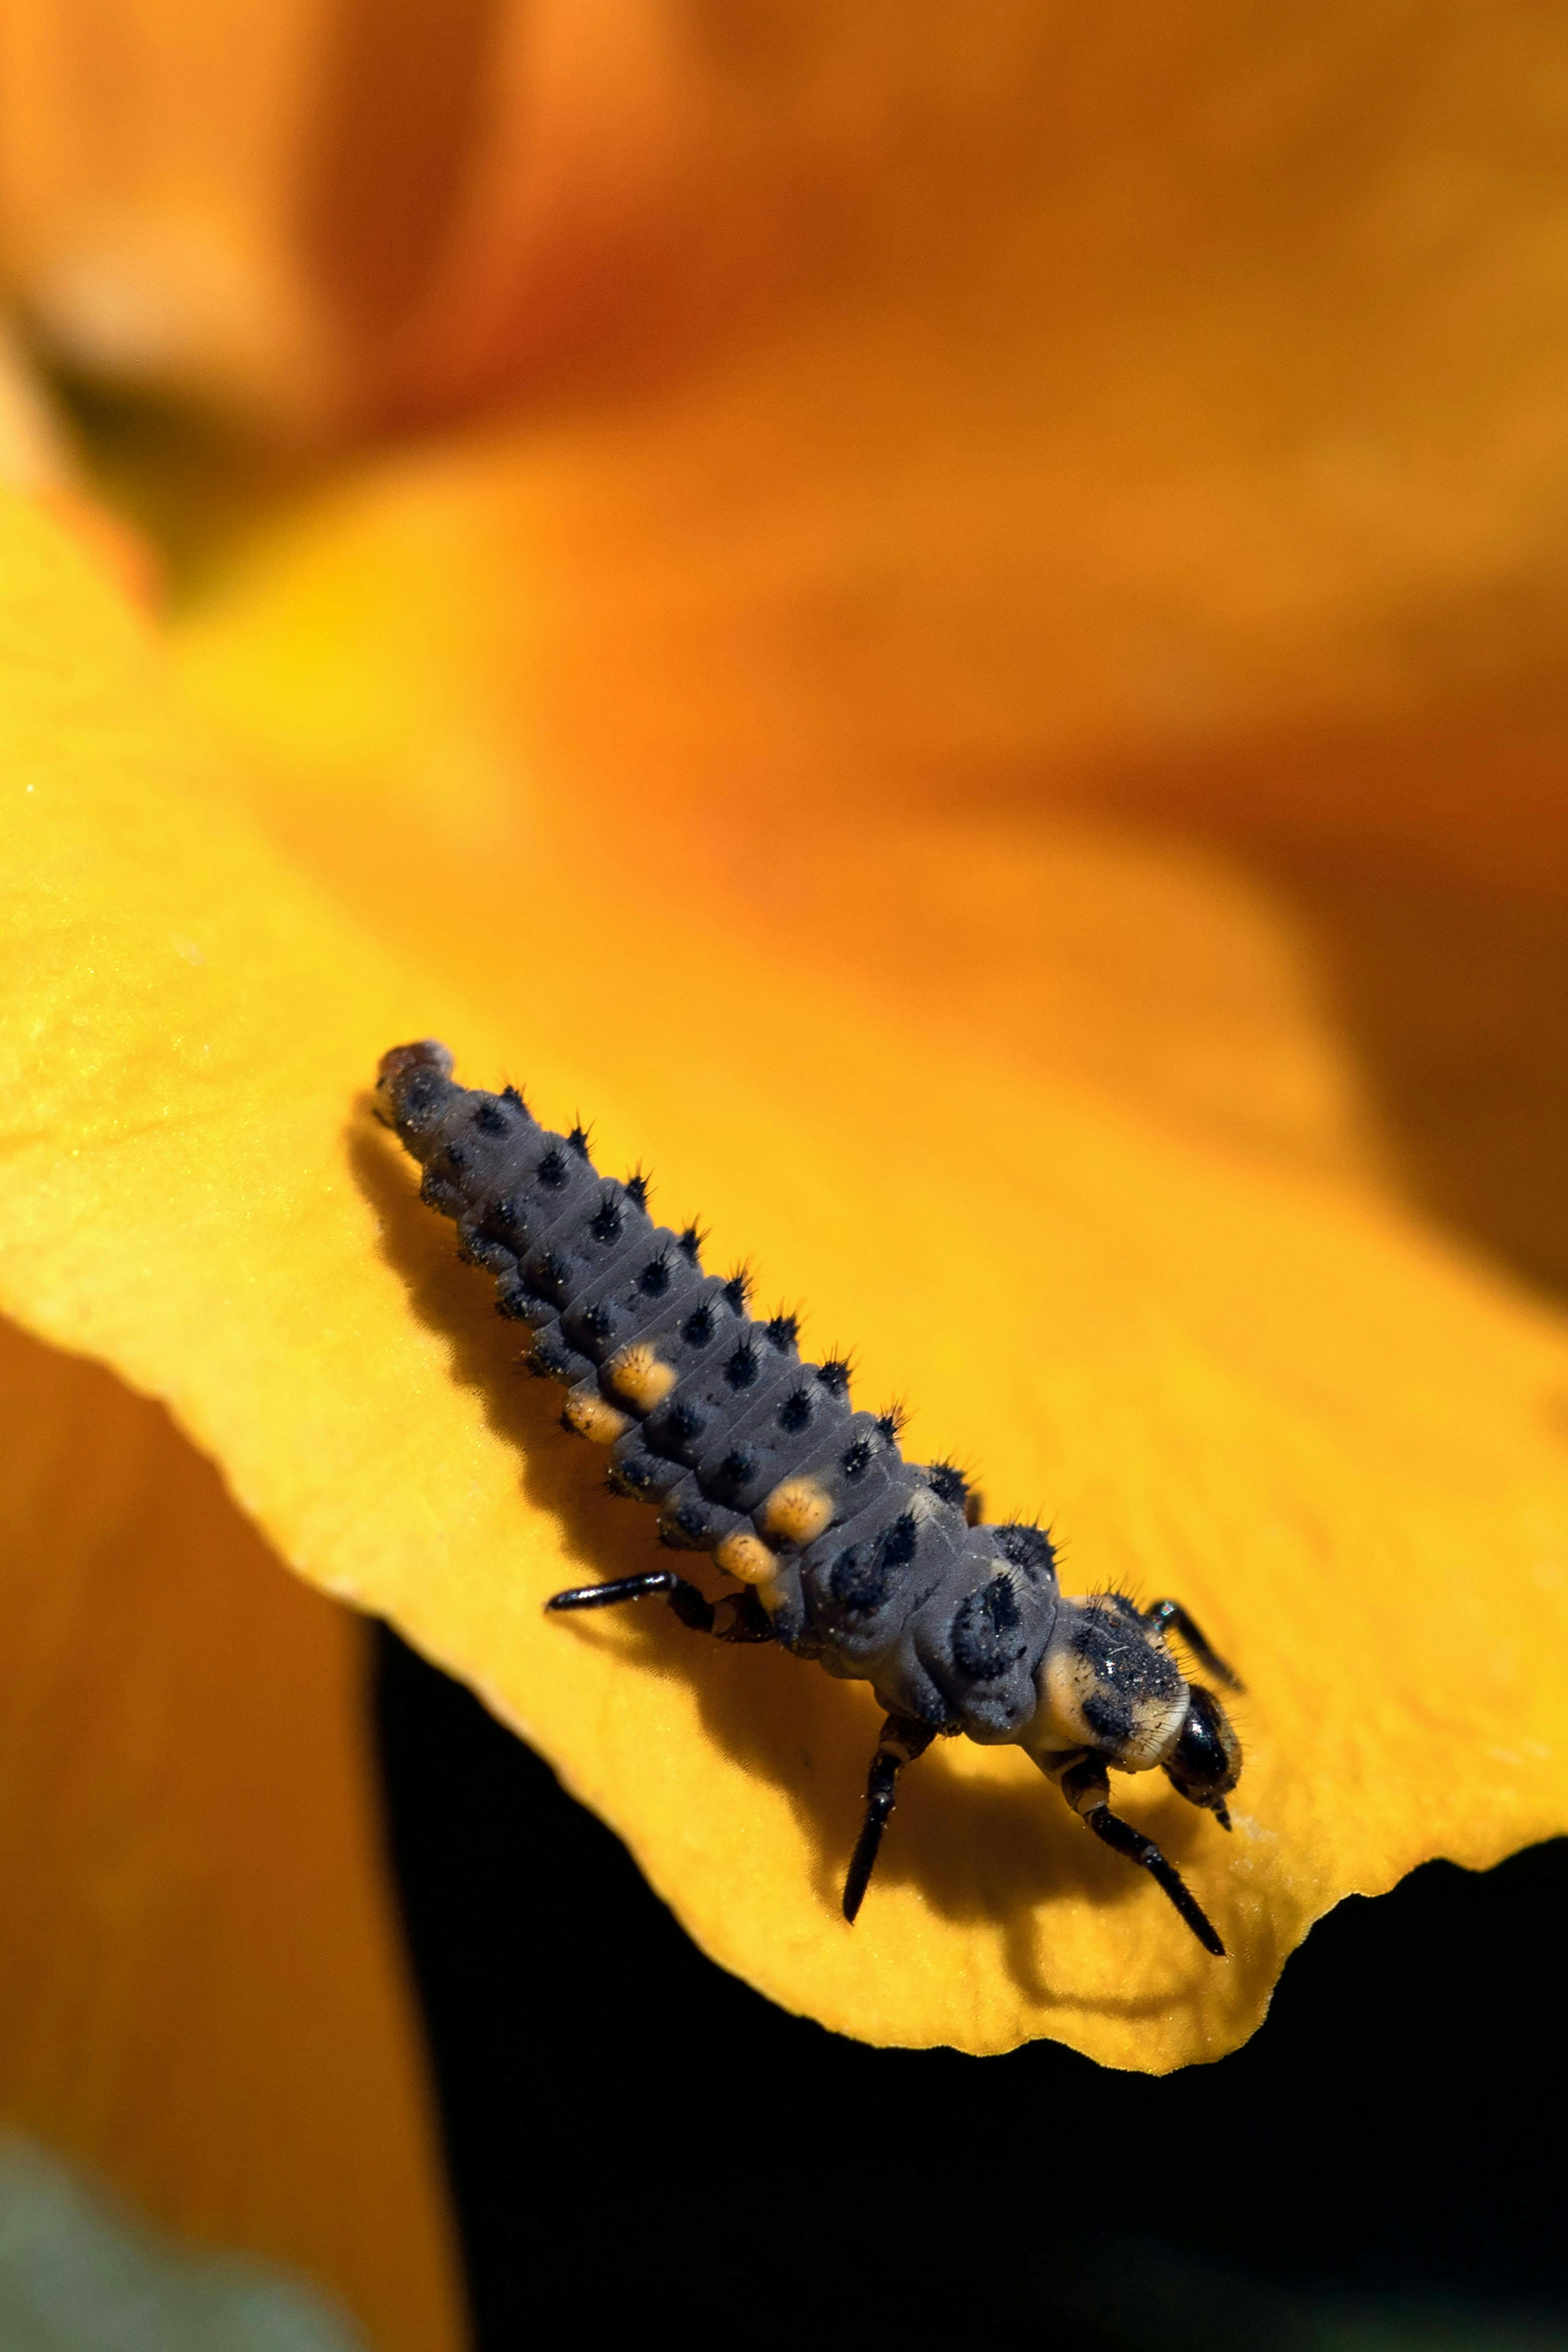 a black and gray caterpillar on a yellow flower